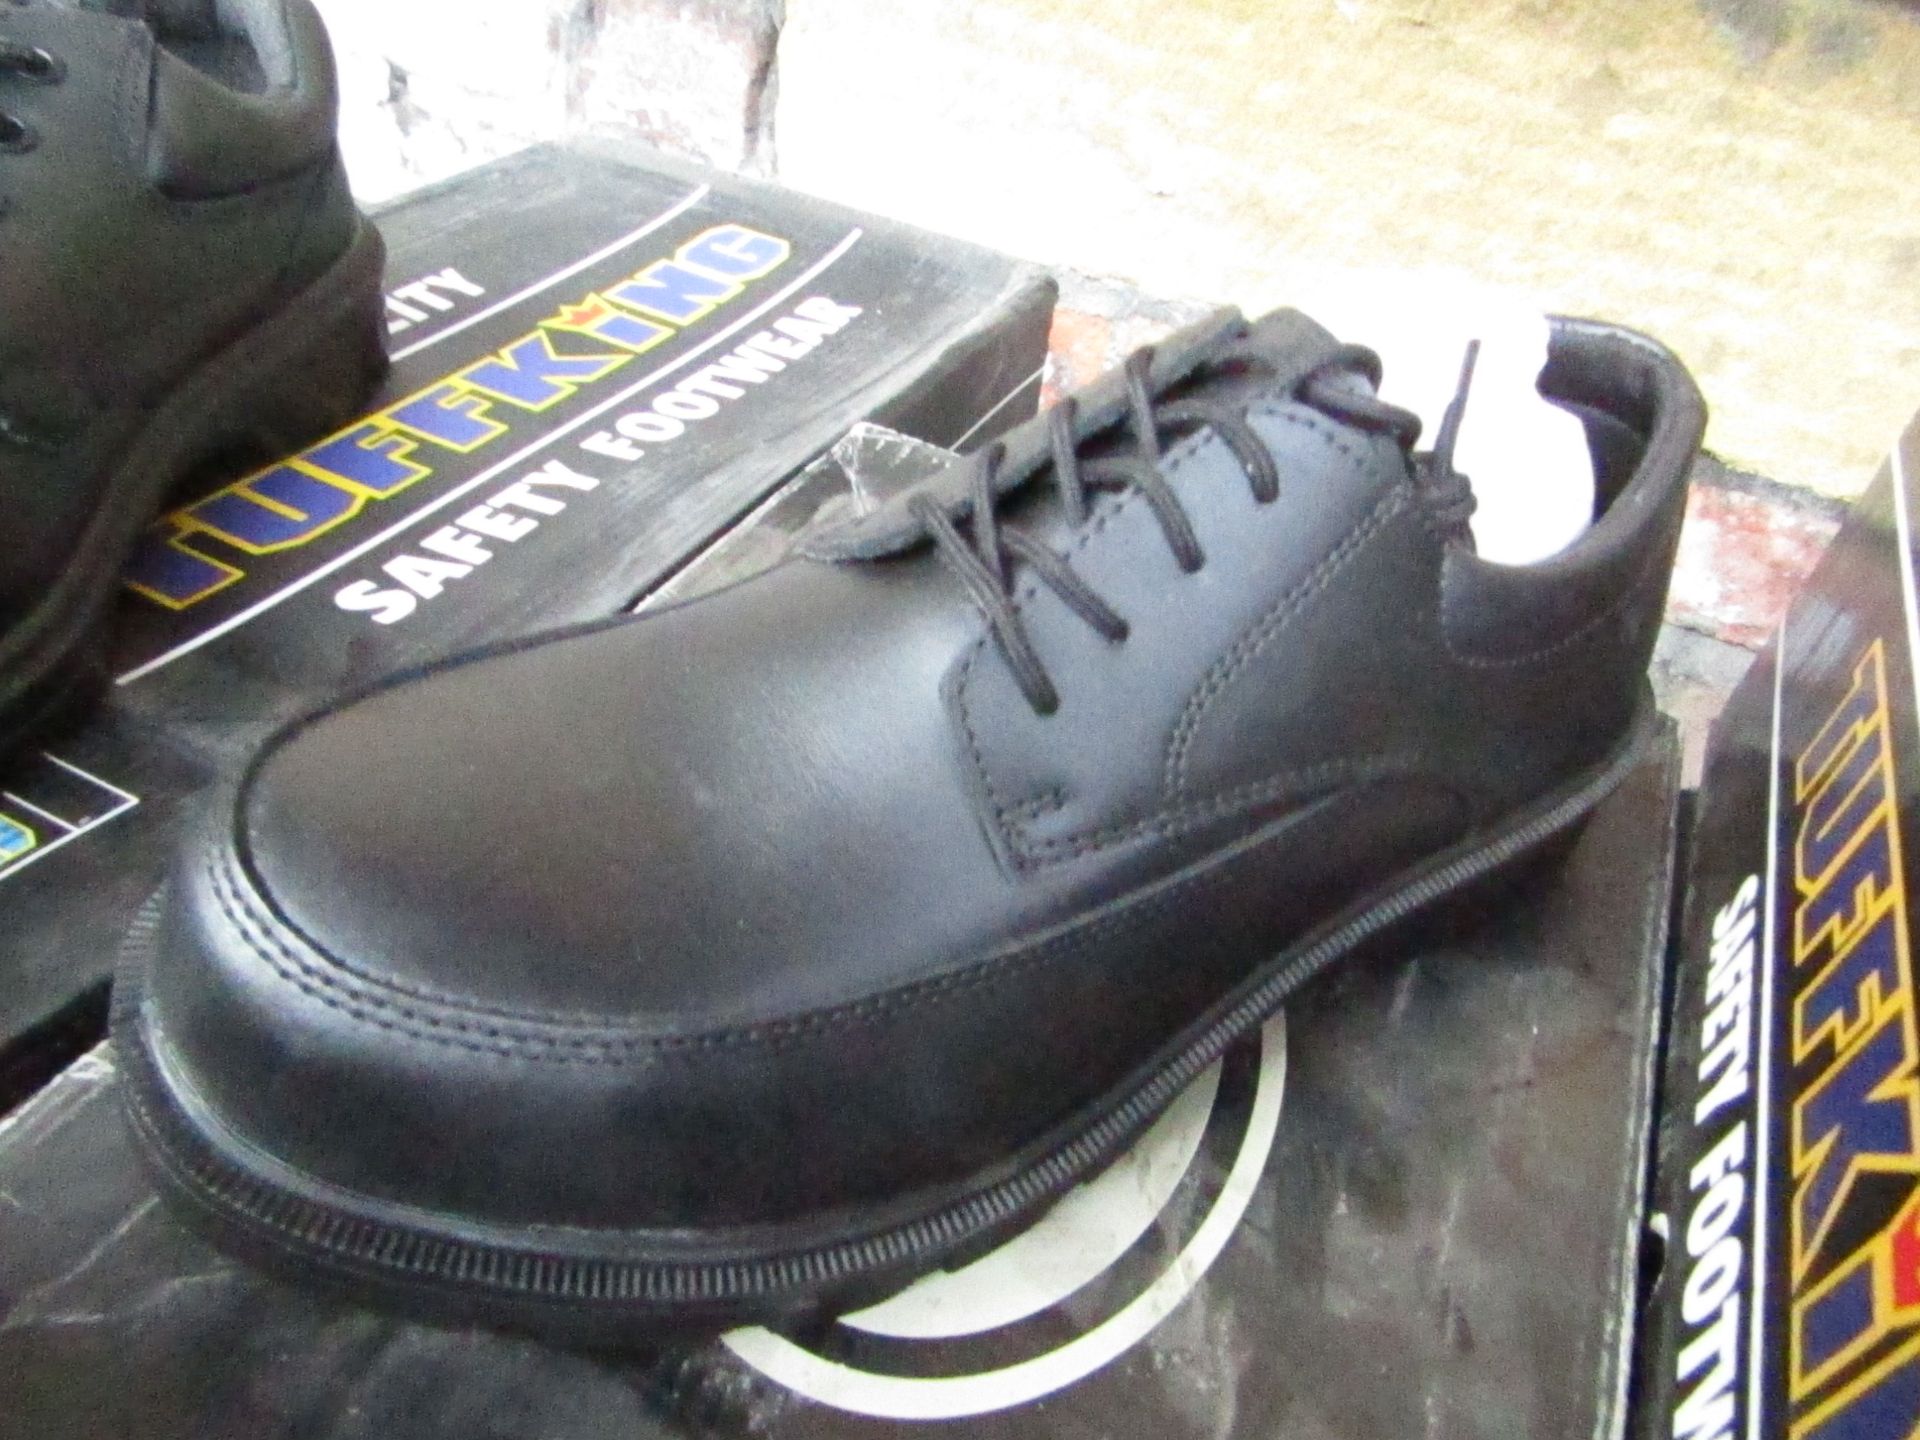 Capps safety steel toe-cap shoes, size 7, new and boxed.